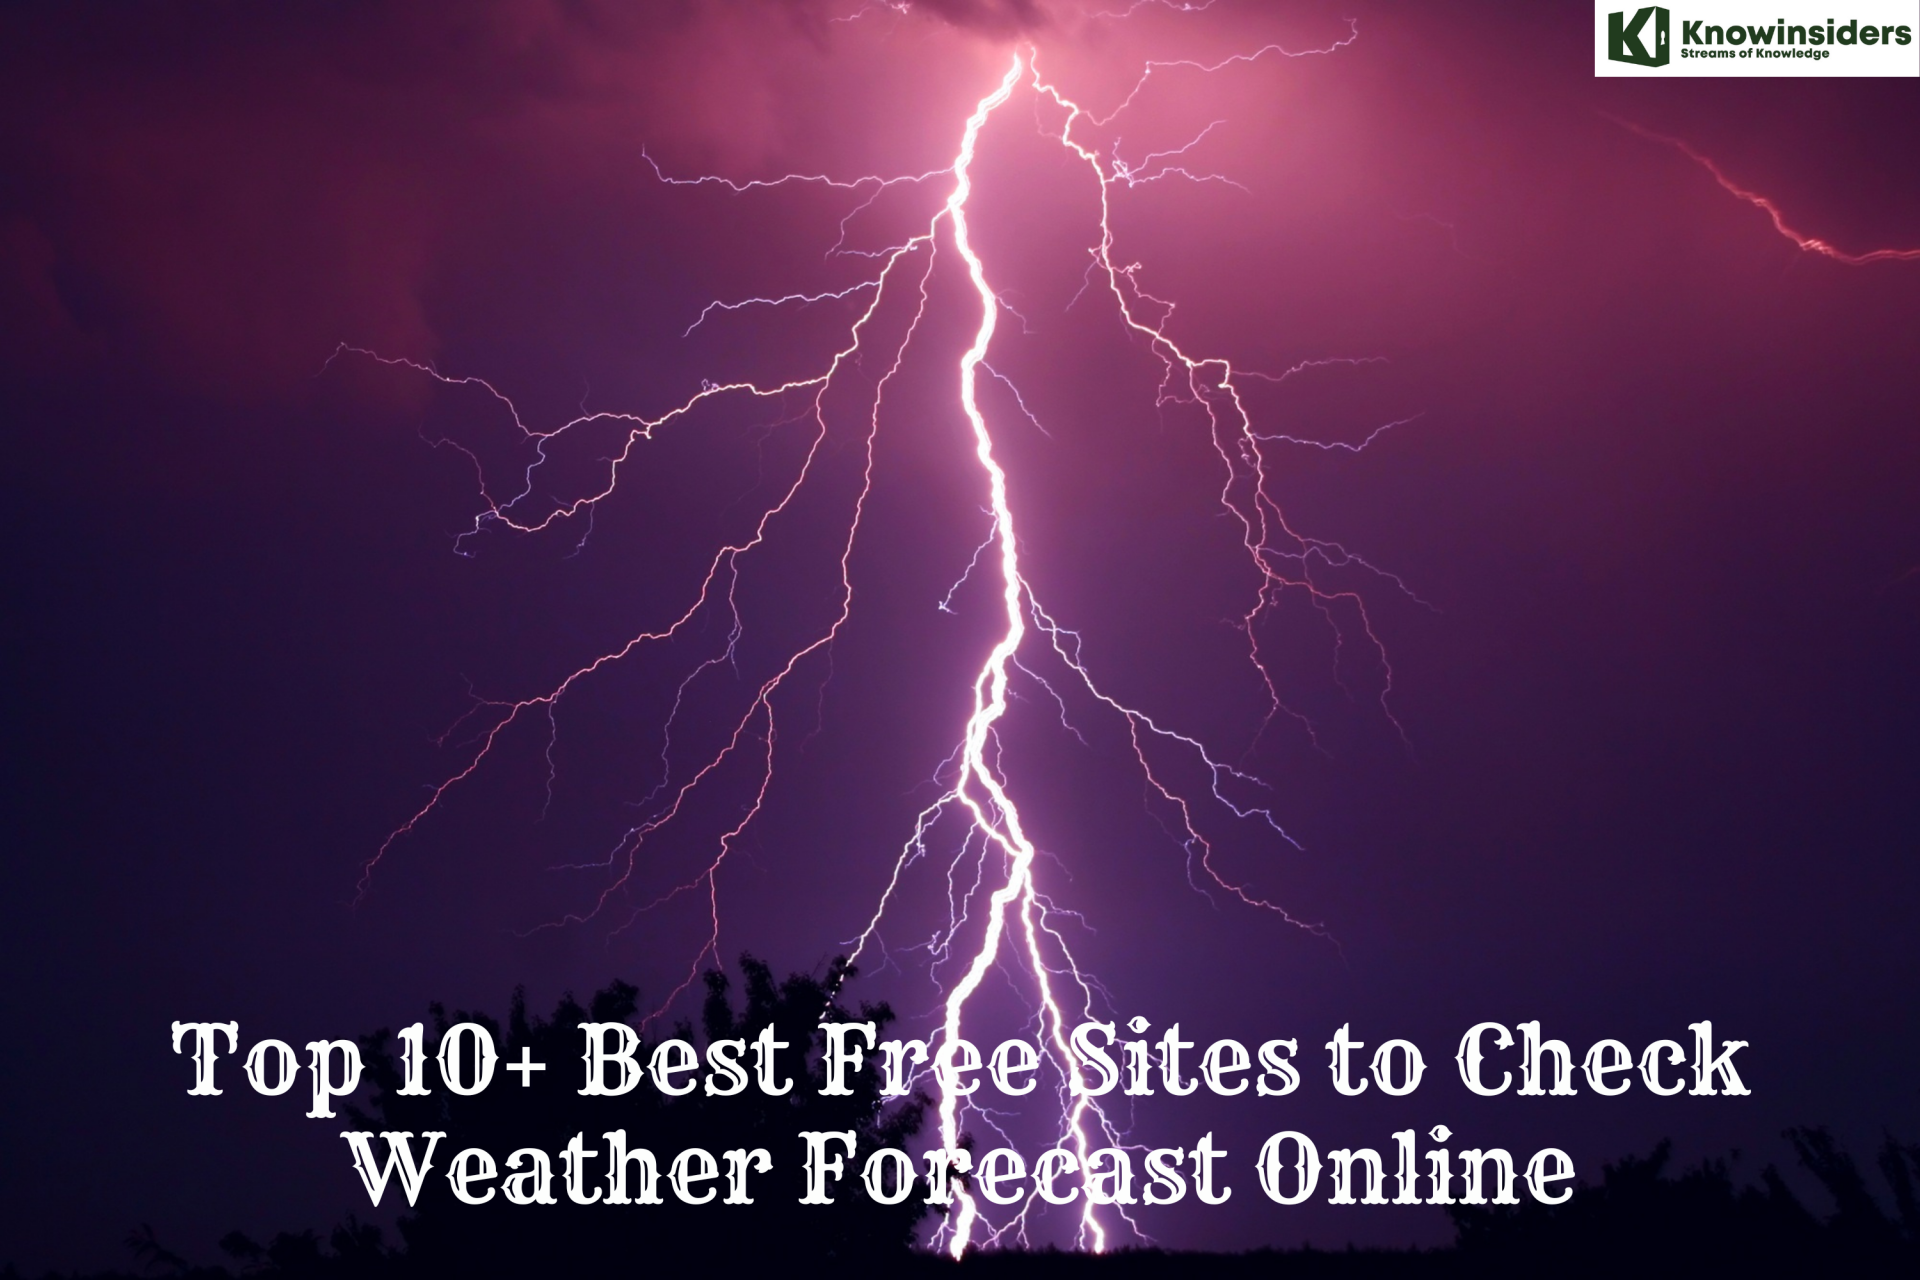 Top 10+ Best Free Sites to Check Weather Forecast Online